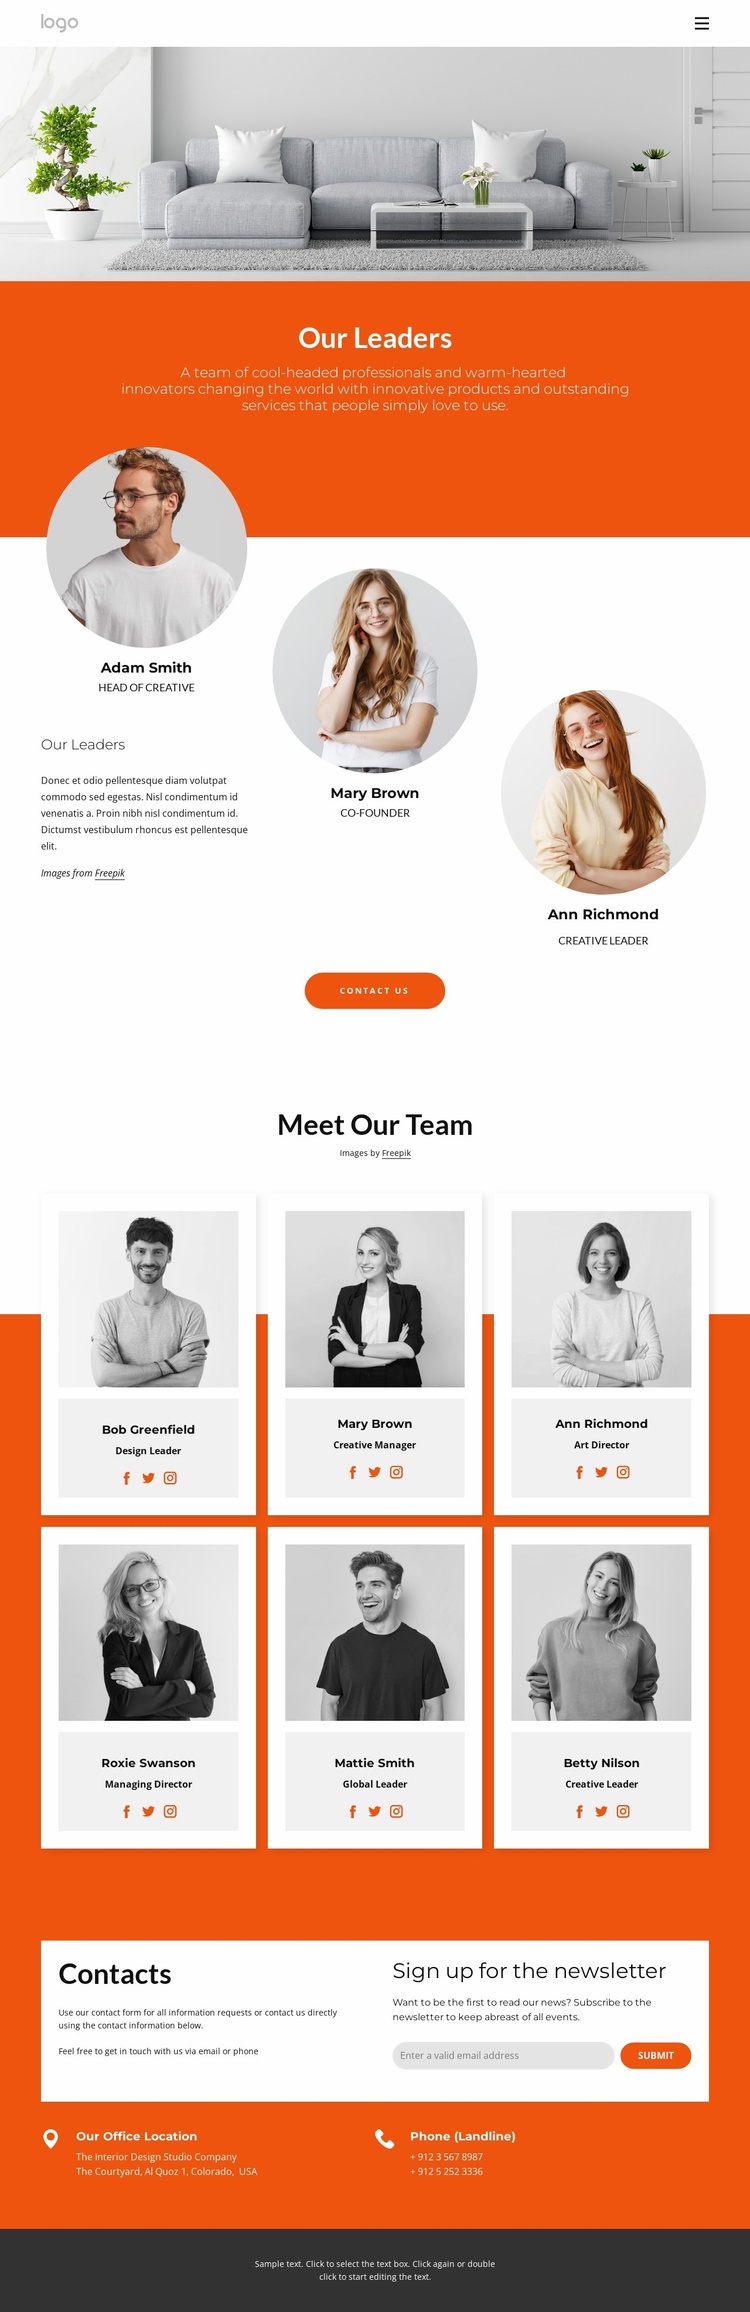 Our great team eCommerce Template